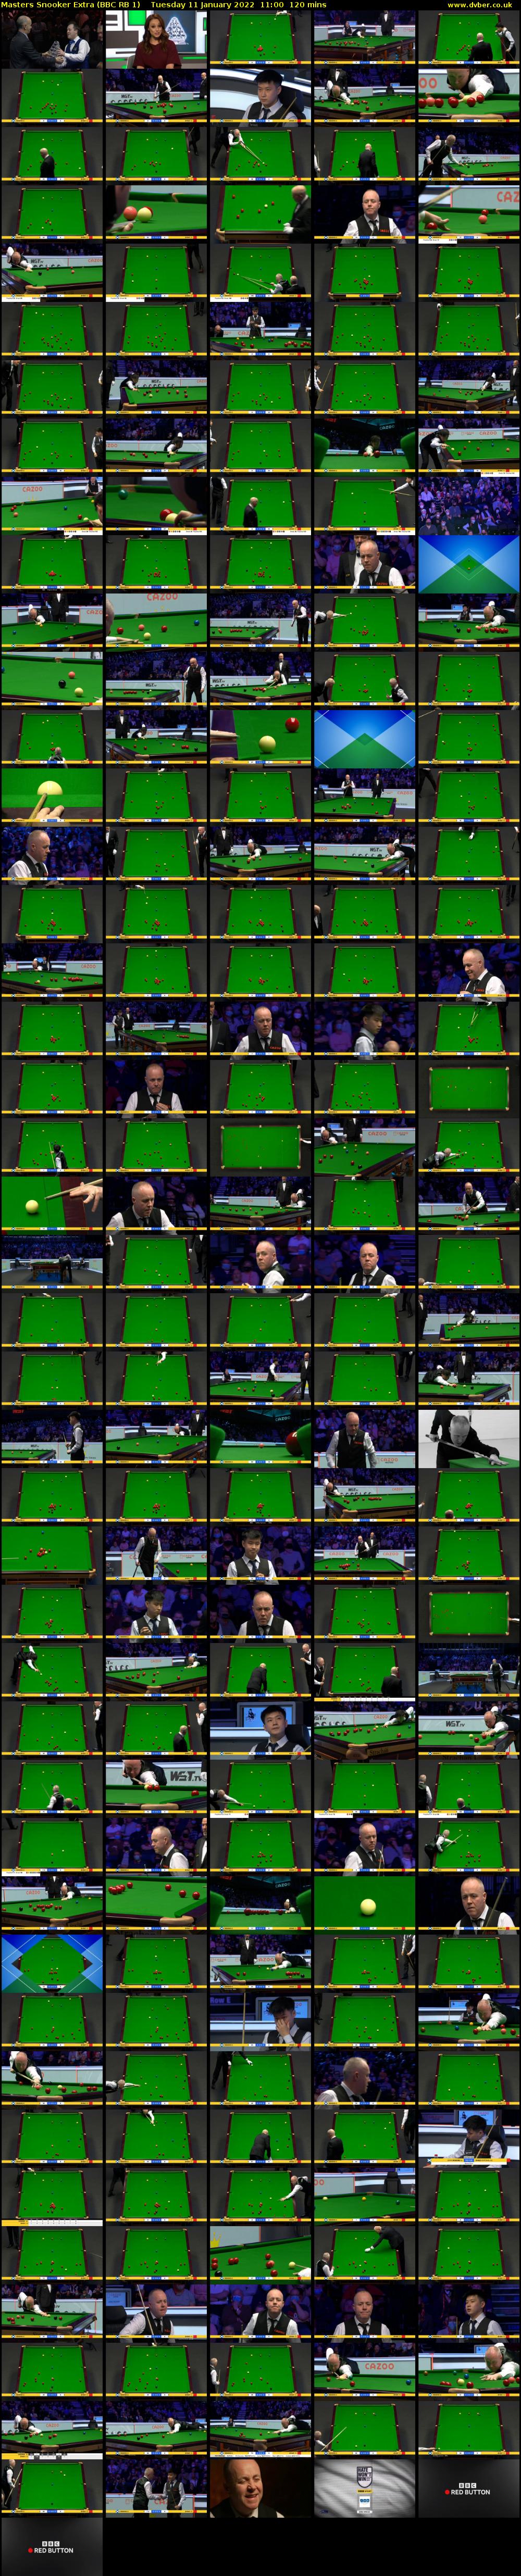 Masters Snooker Extra (BBC RB 1) Tuesday 11 January 2022 11:00 - 13:00